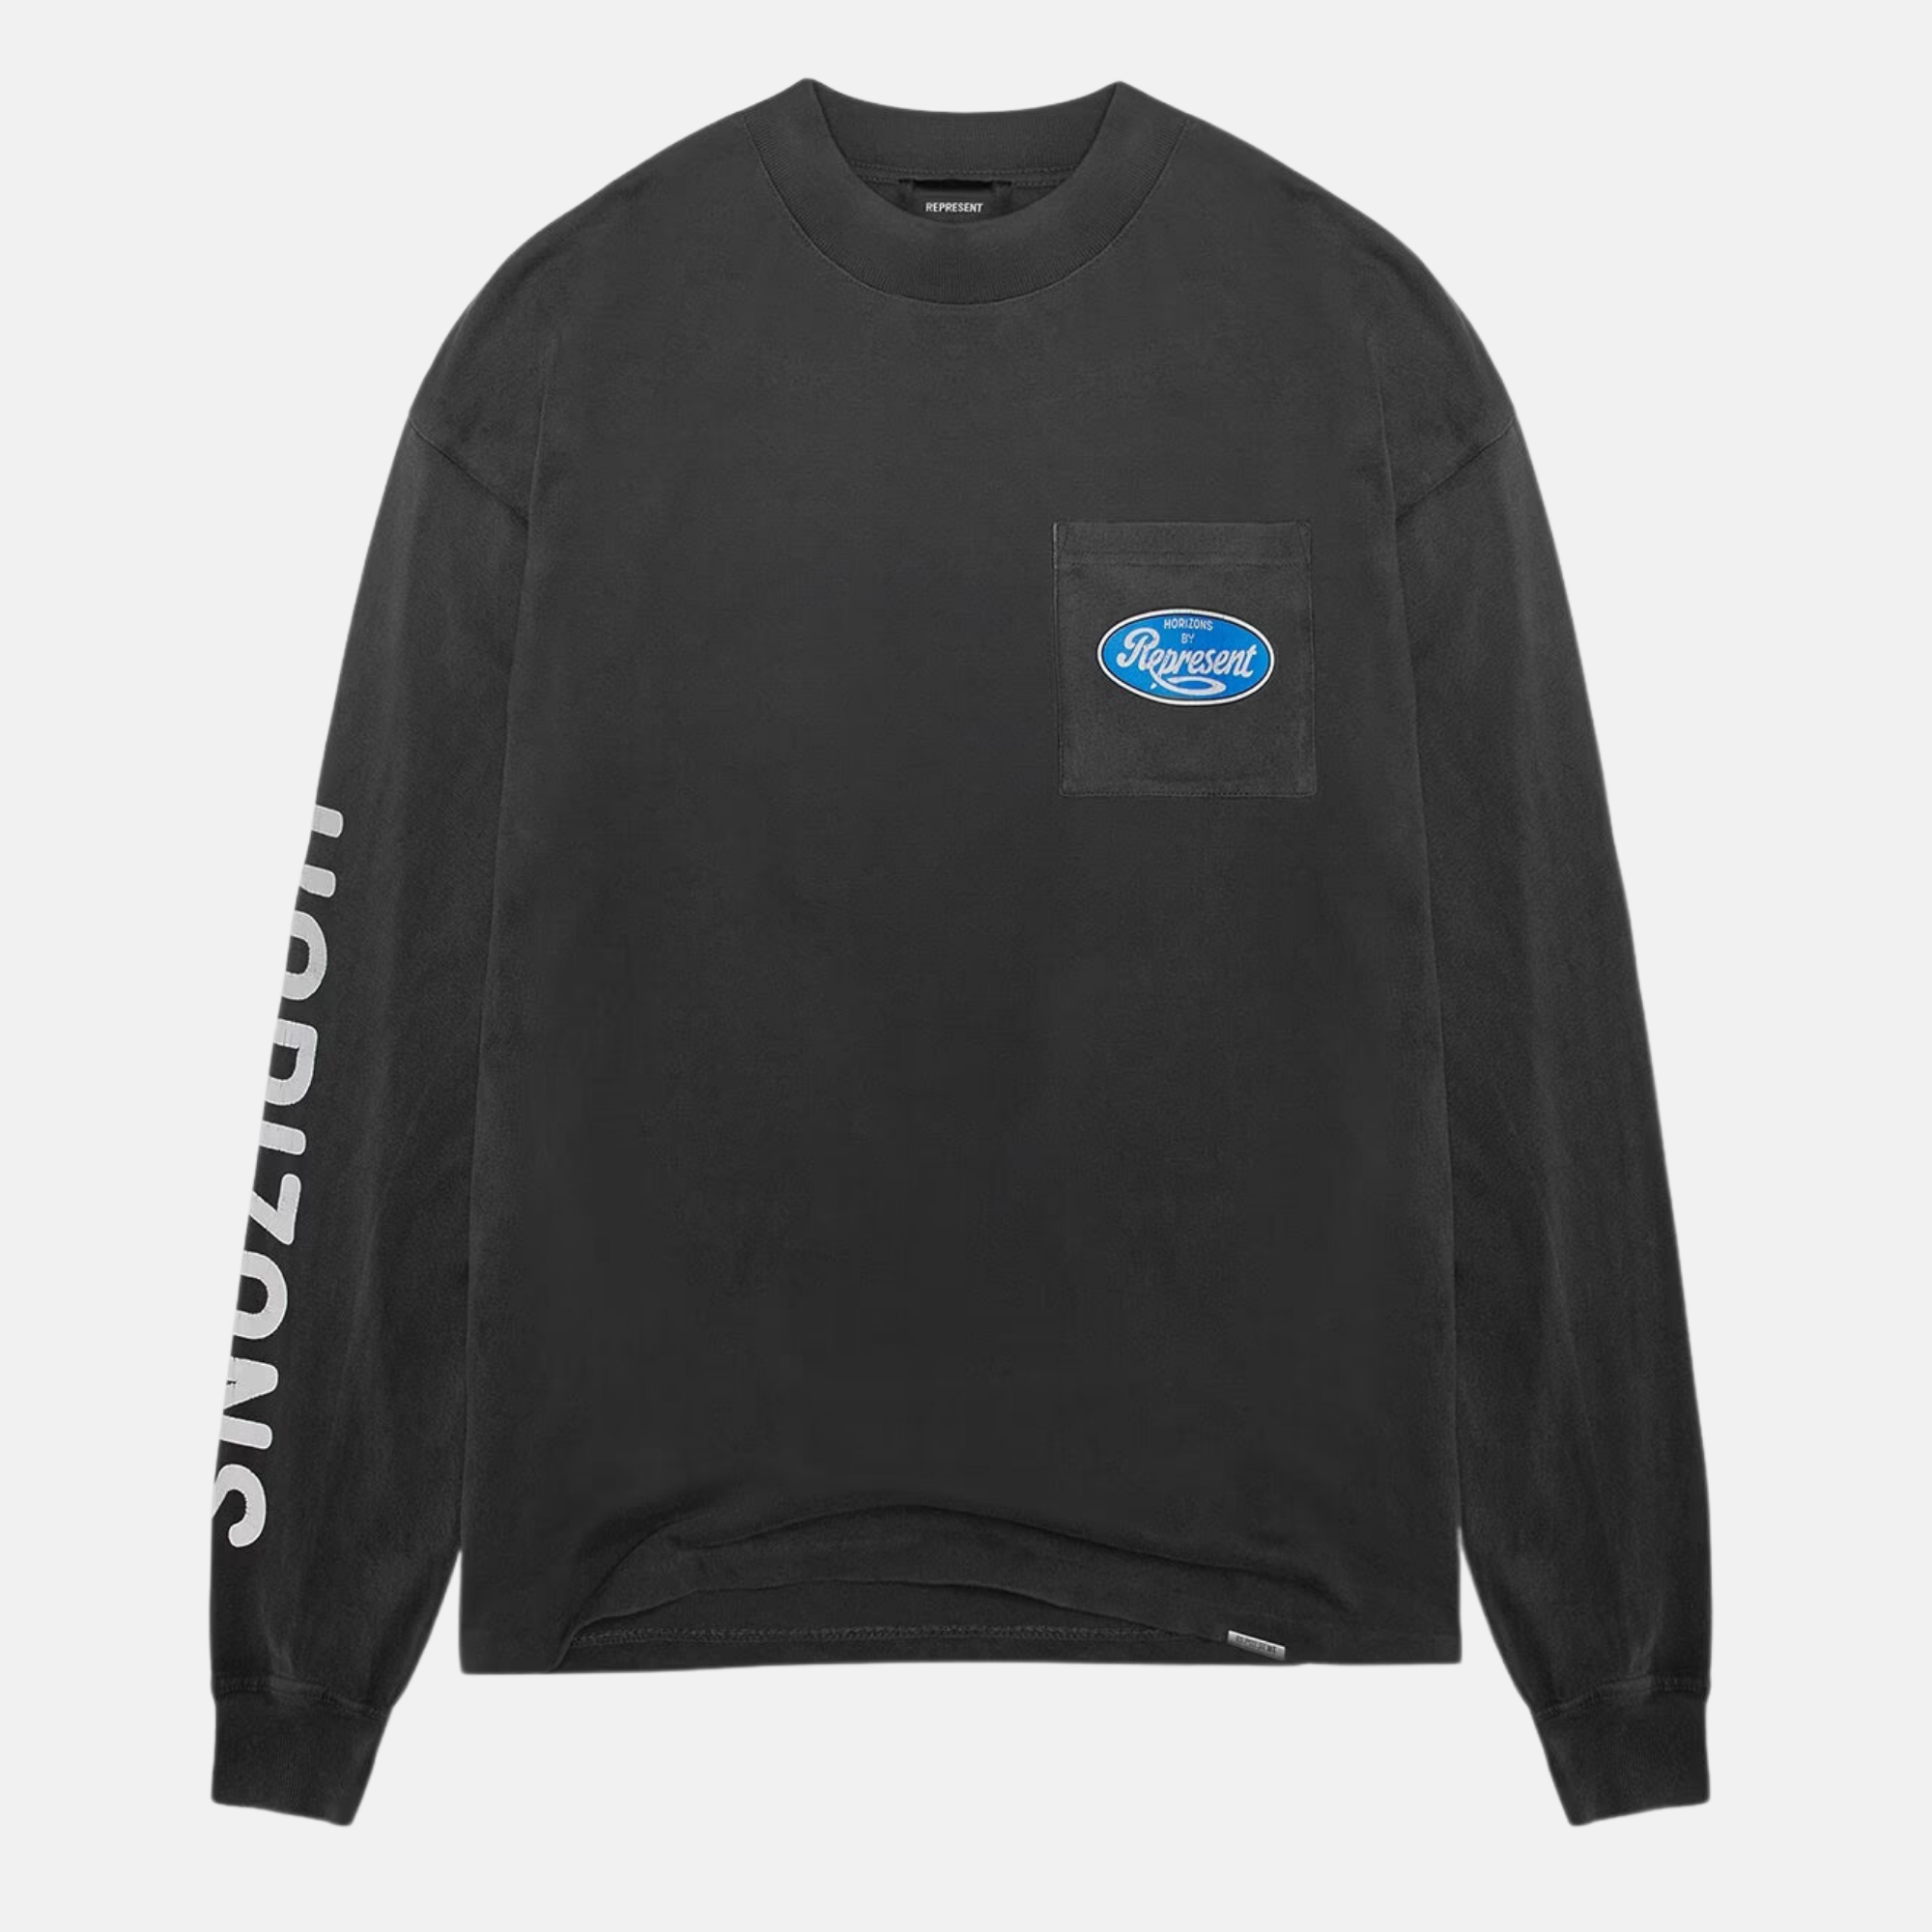 Represent Aged Black Classic Parts Long Sleeve T-Shirt